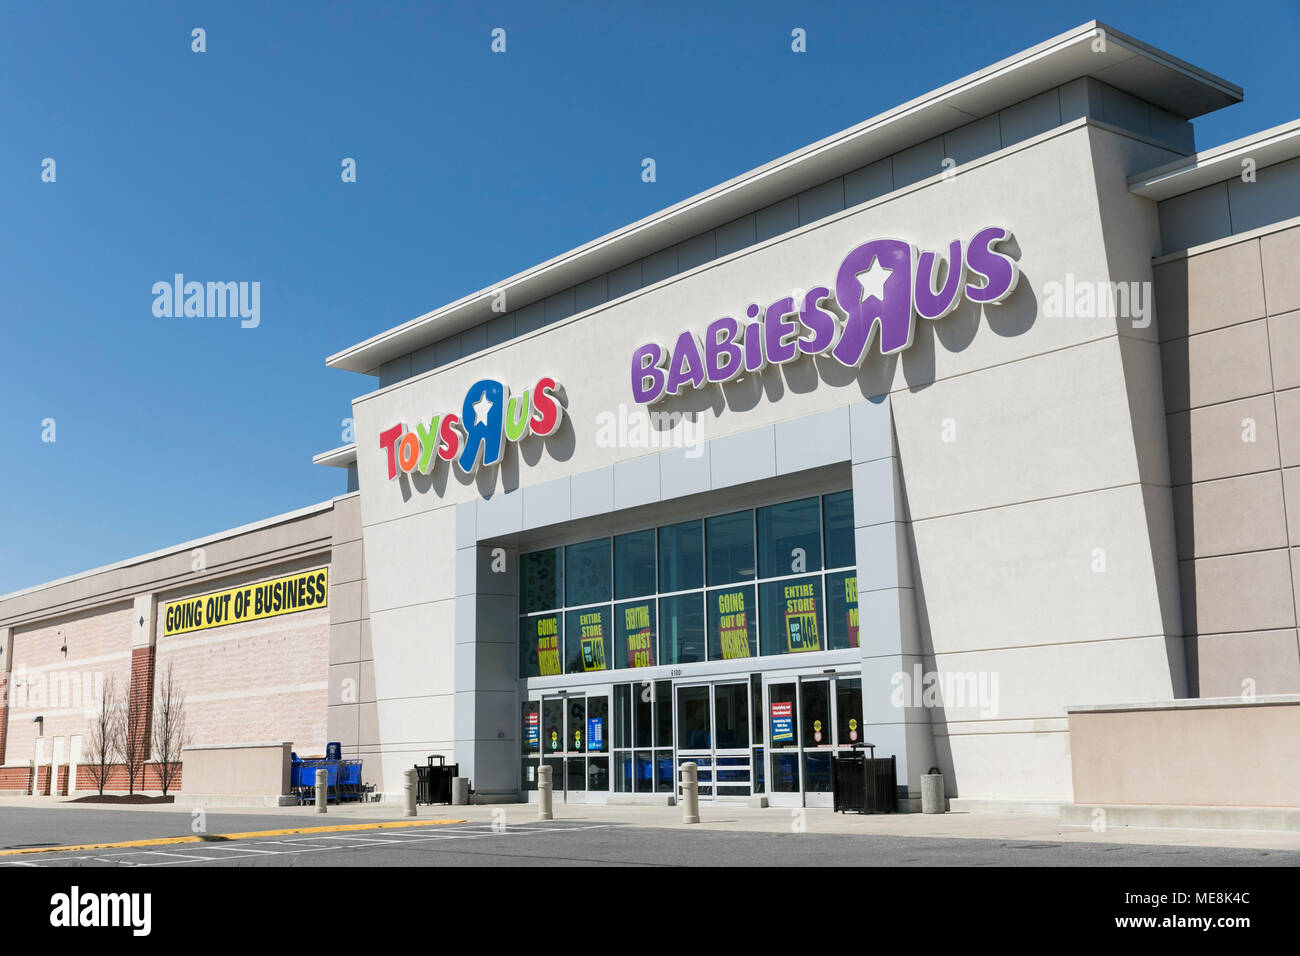 A logo sign outside of a joint Toys 'R' Us and Babies 'R' Us retail store in Columbia, Maryland with 'Going Out Of Business' signage on April 20, 2018 Stock Photo